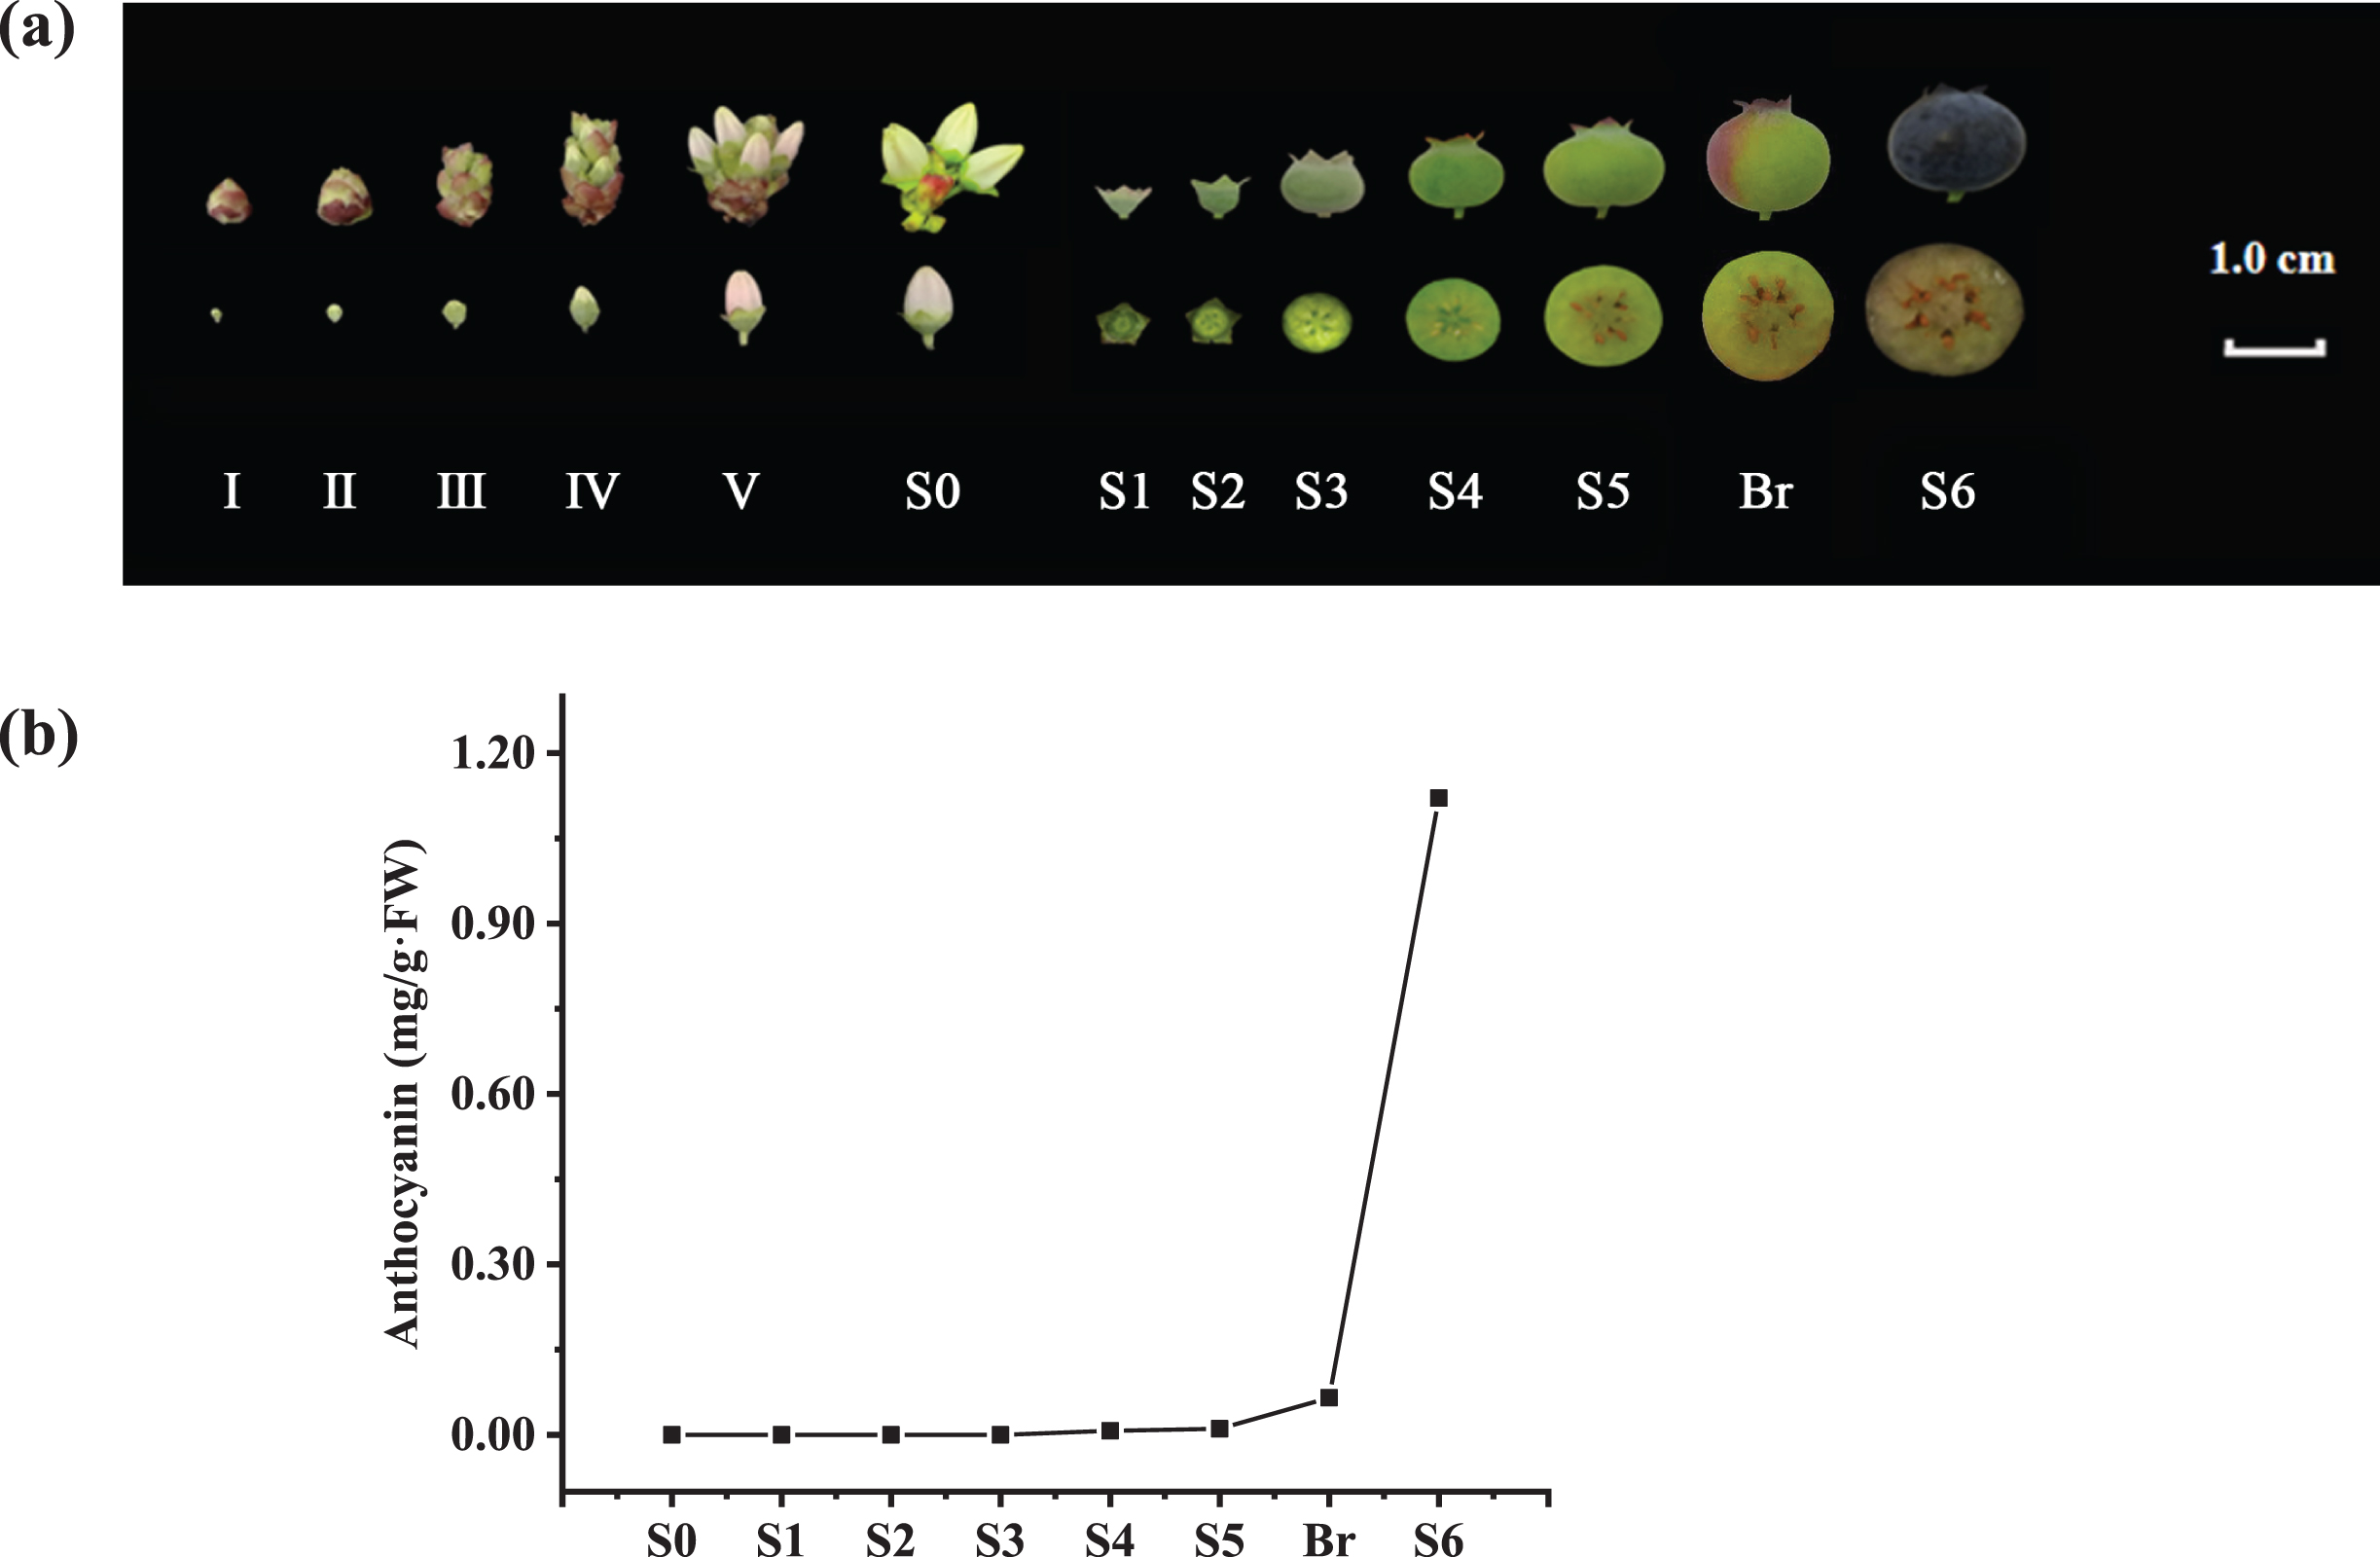 Developmental stages and anthocyanin contents of V. corymbosum (cv. O’Neal) flowers and fruits. a. The flower and berry developmental stages used in this study. b. The total anthocyanin content in the ovaries and fruits throughout development.